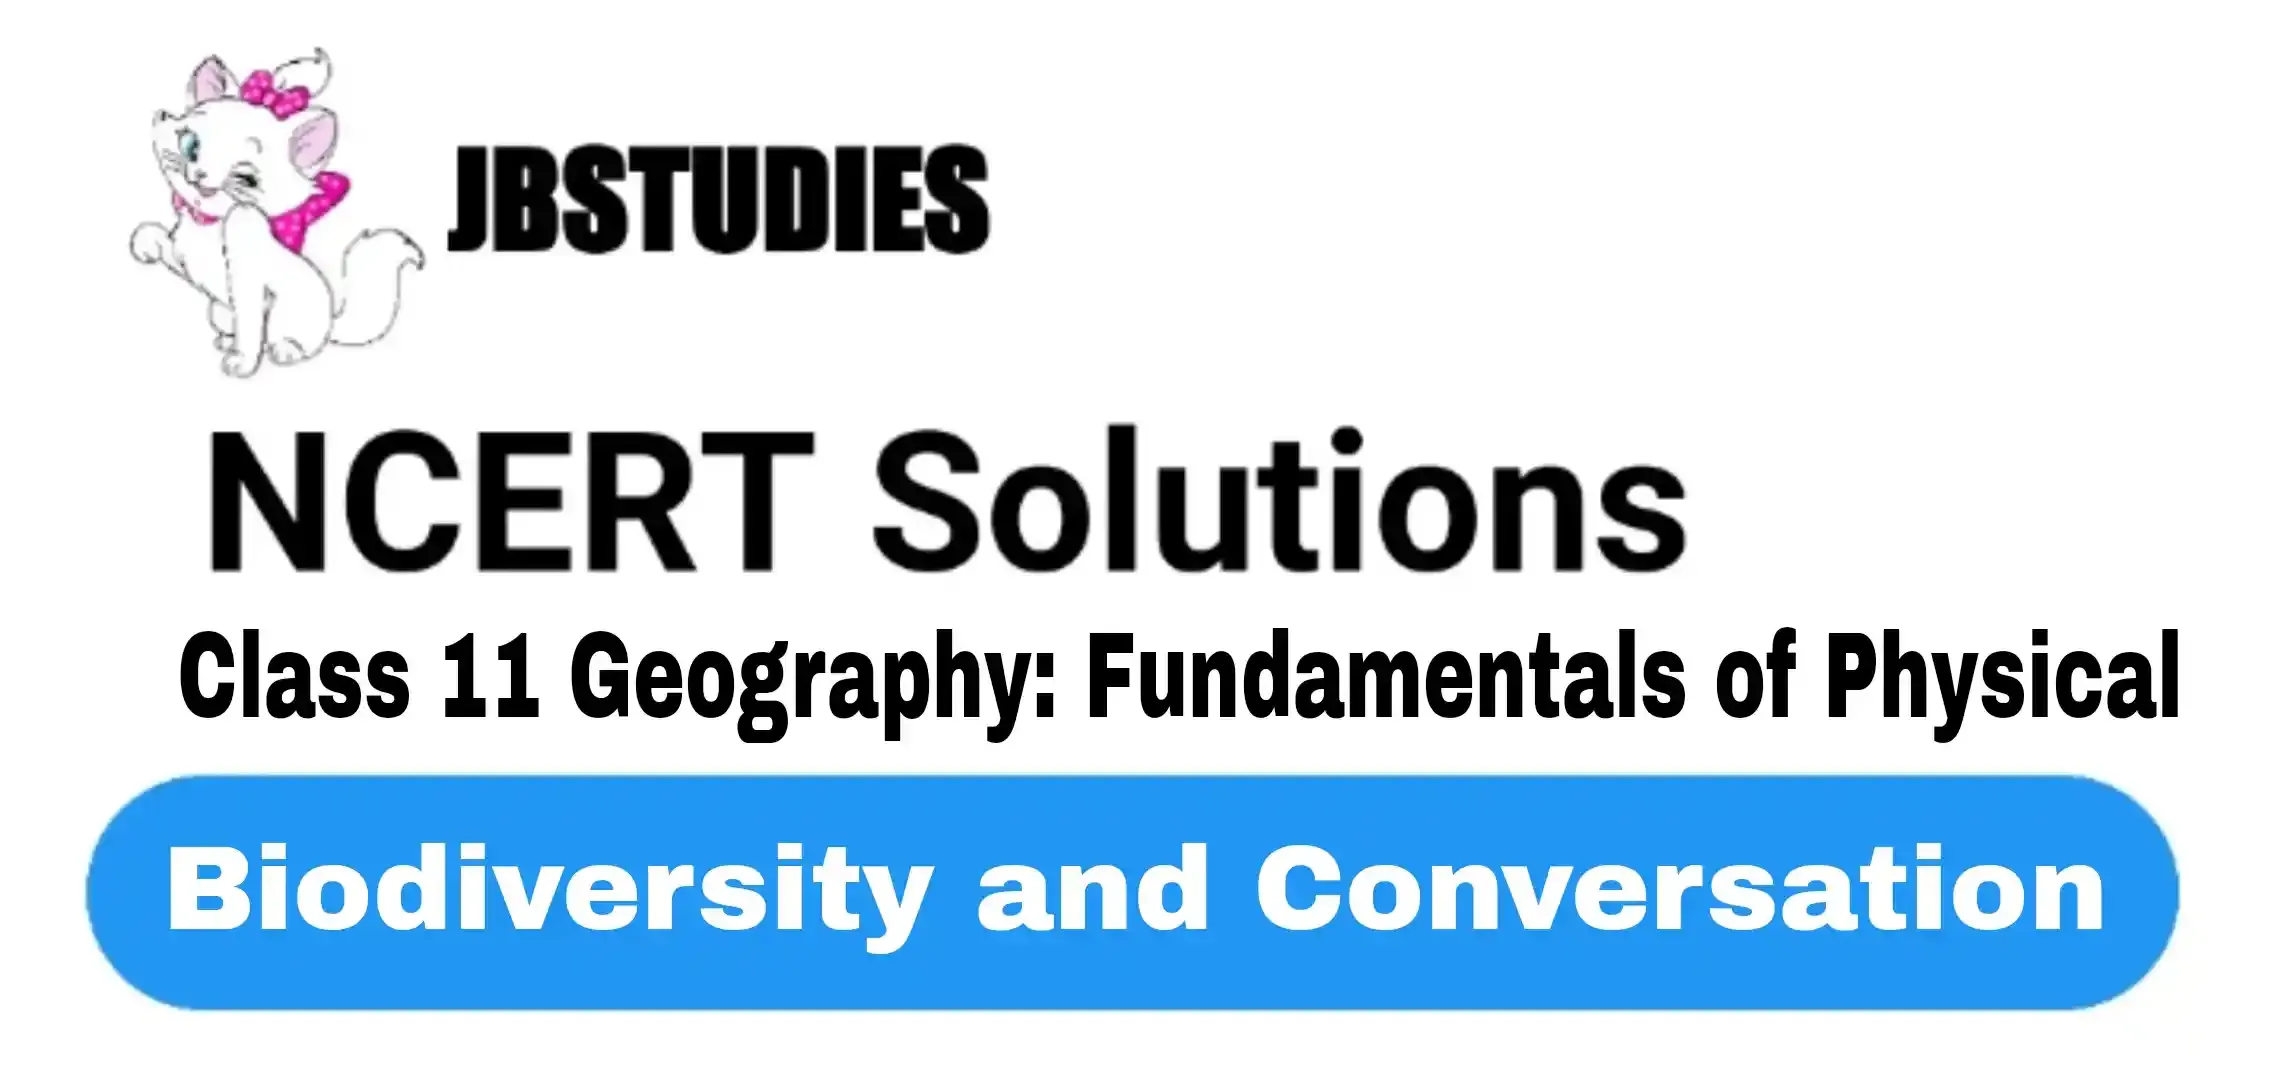 Solutions Class 11 Geography Chapter-16 Biodiversity and Conversation